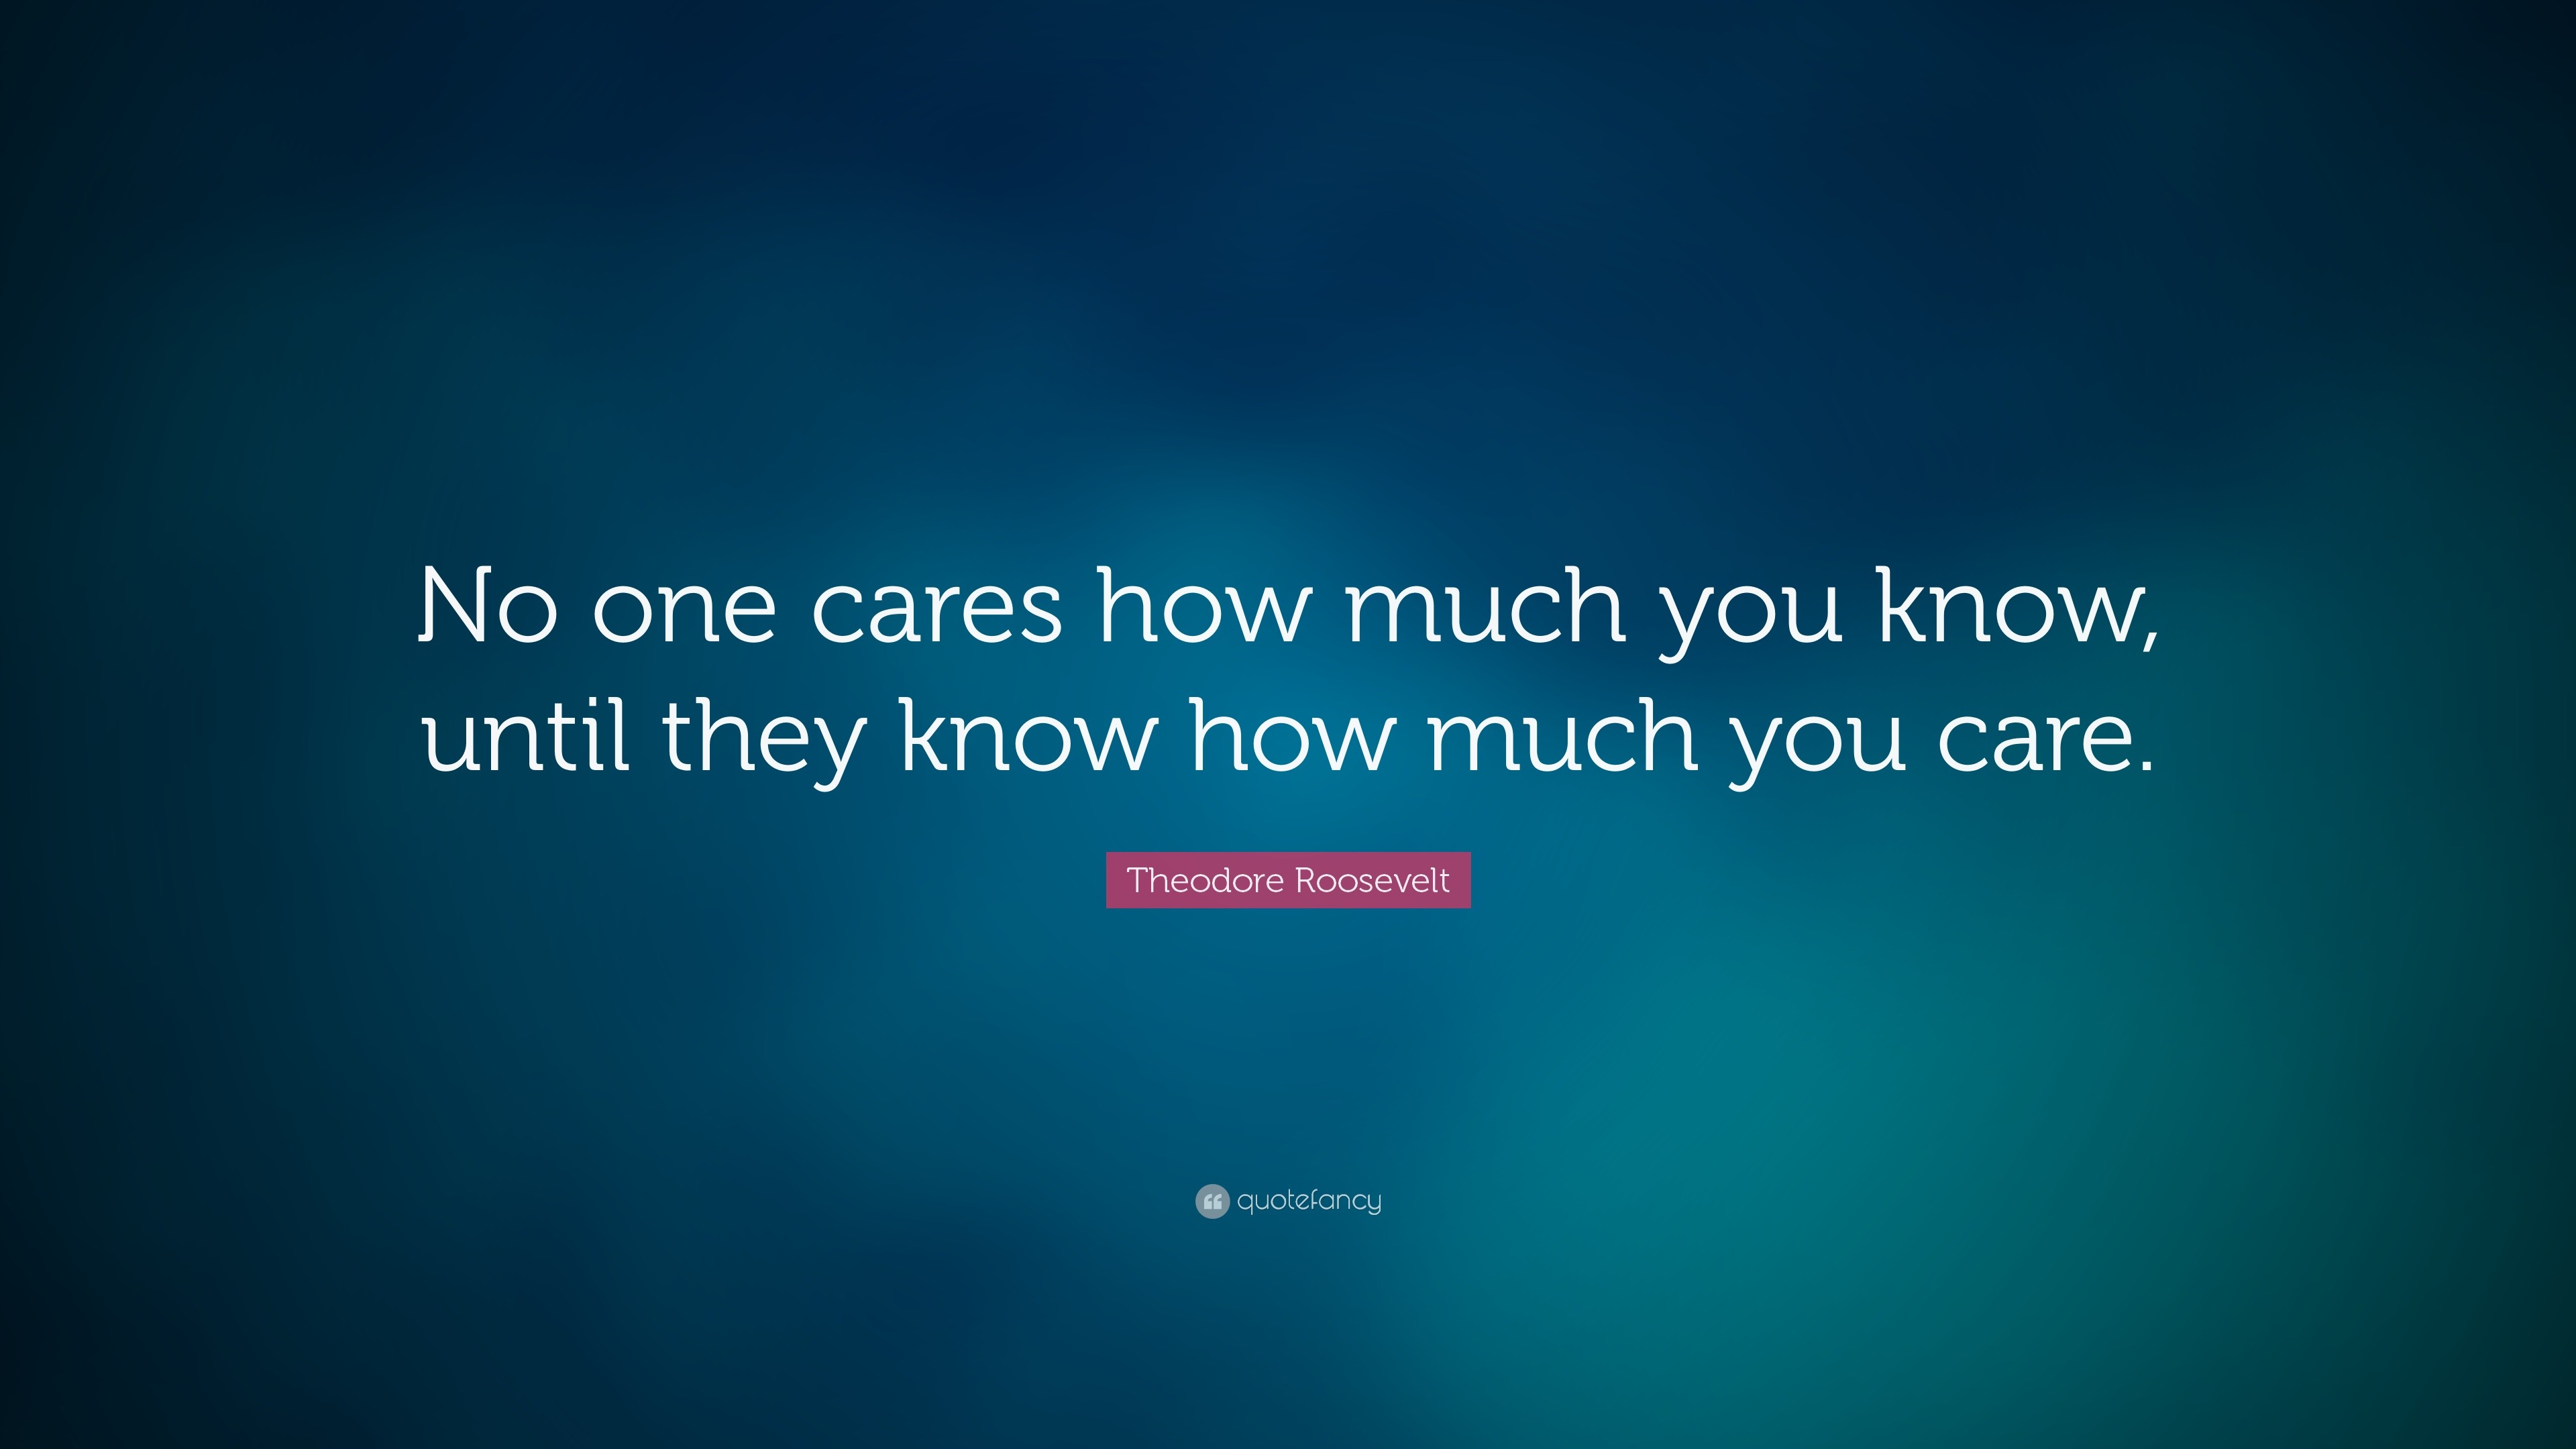 Theodore Roosevelt Quote: “No one cares how much you know, until they